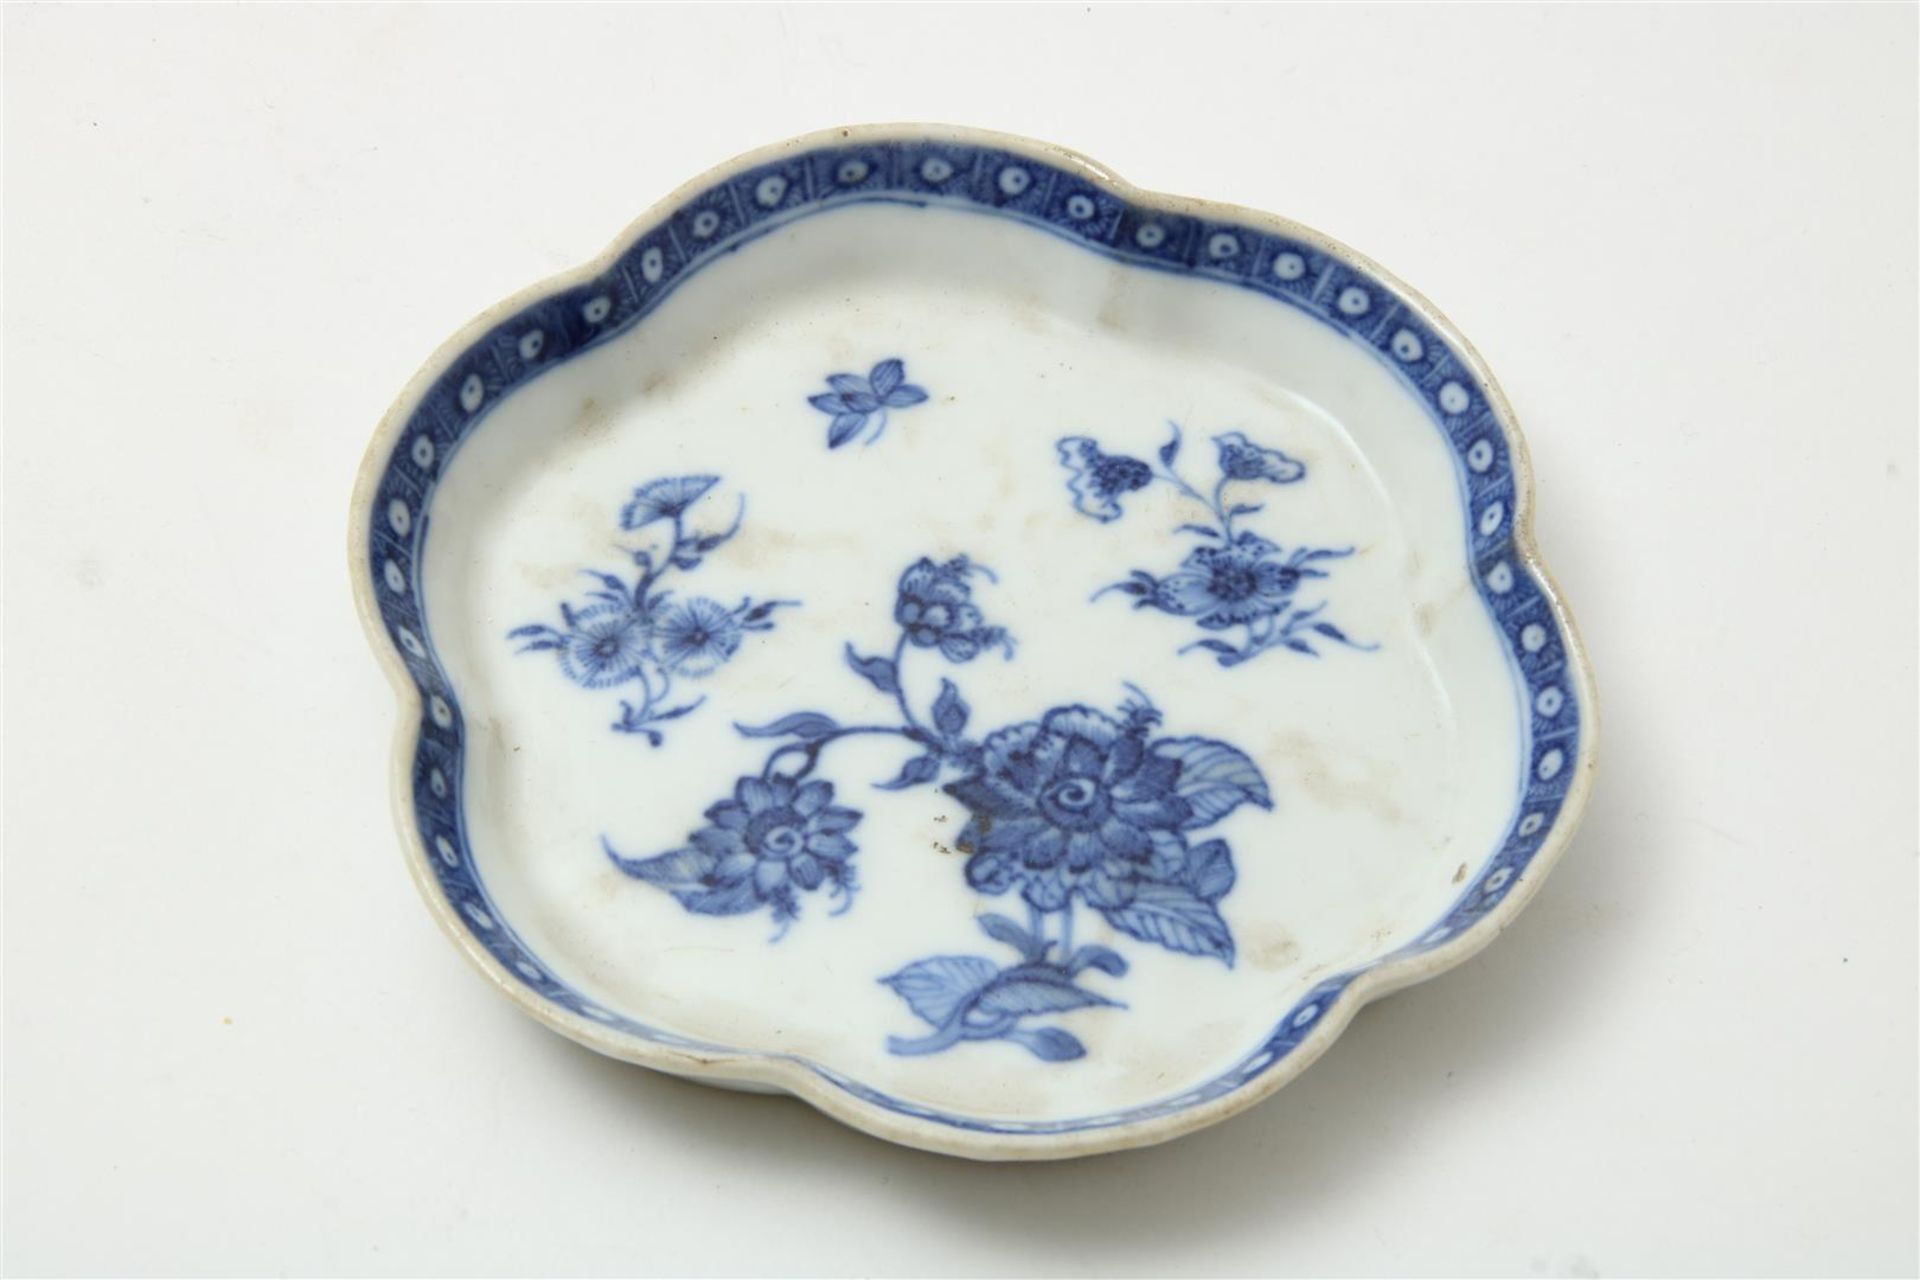 Porcelain pattipan decorated with flowers, China Cheng Lung 18th century, diam. 13cm.